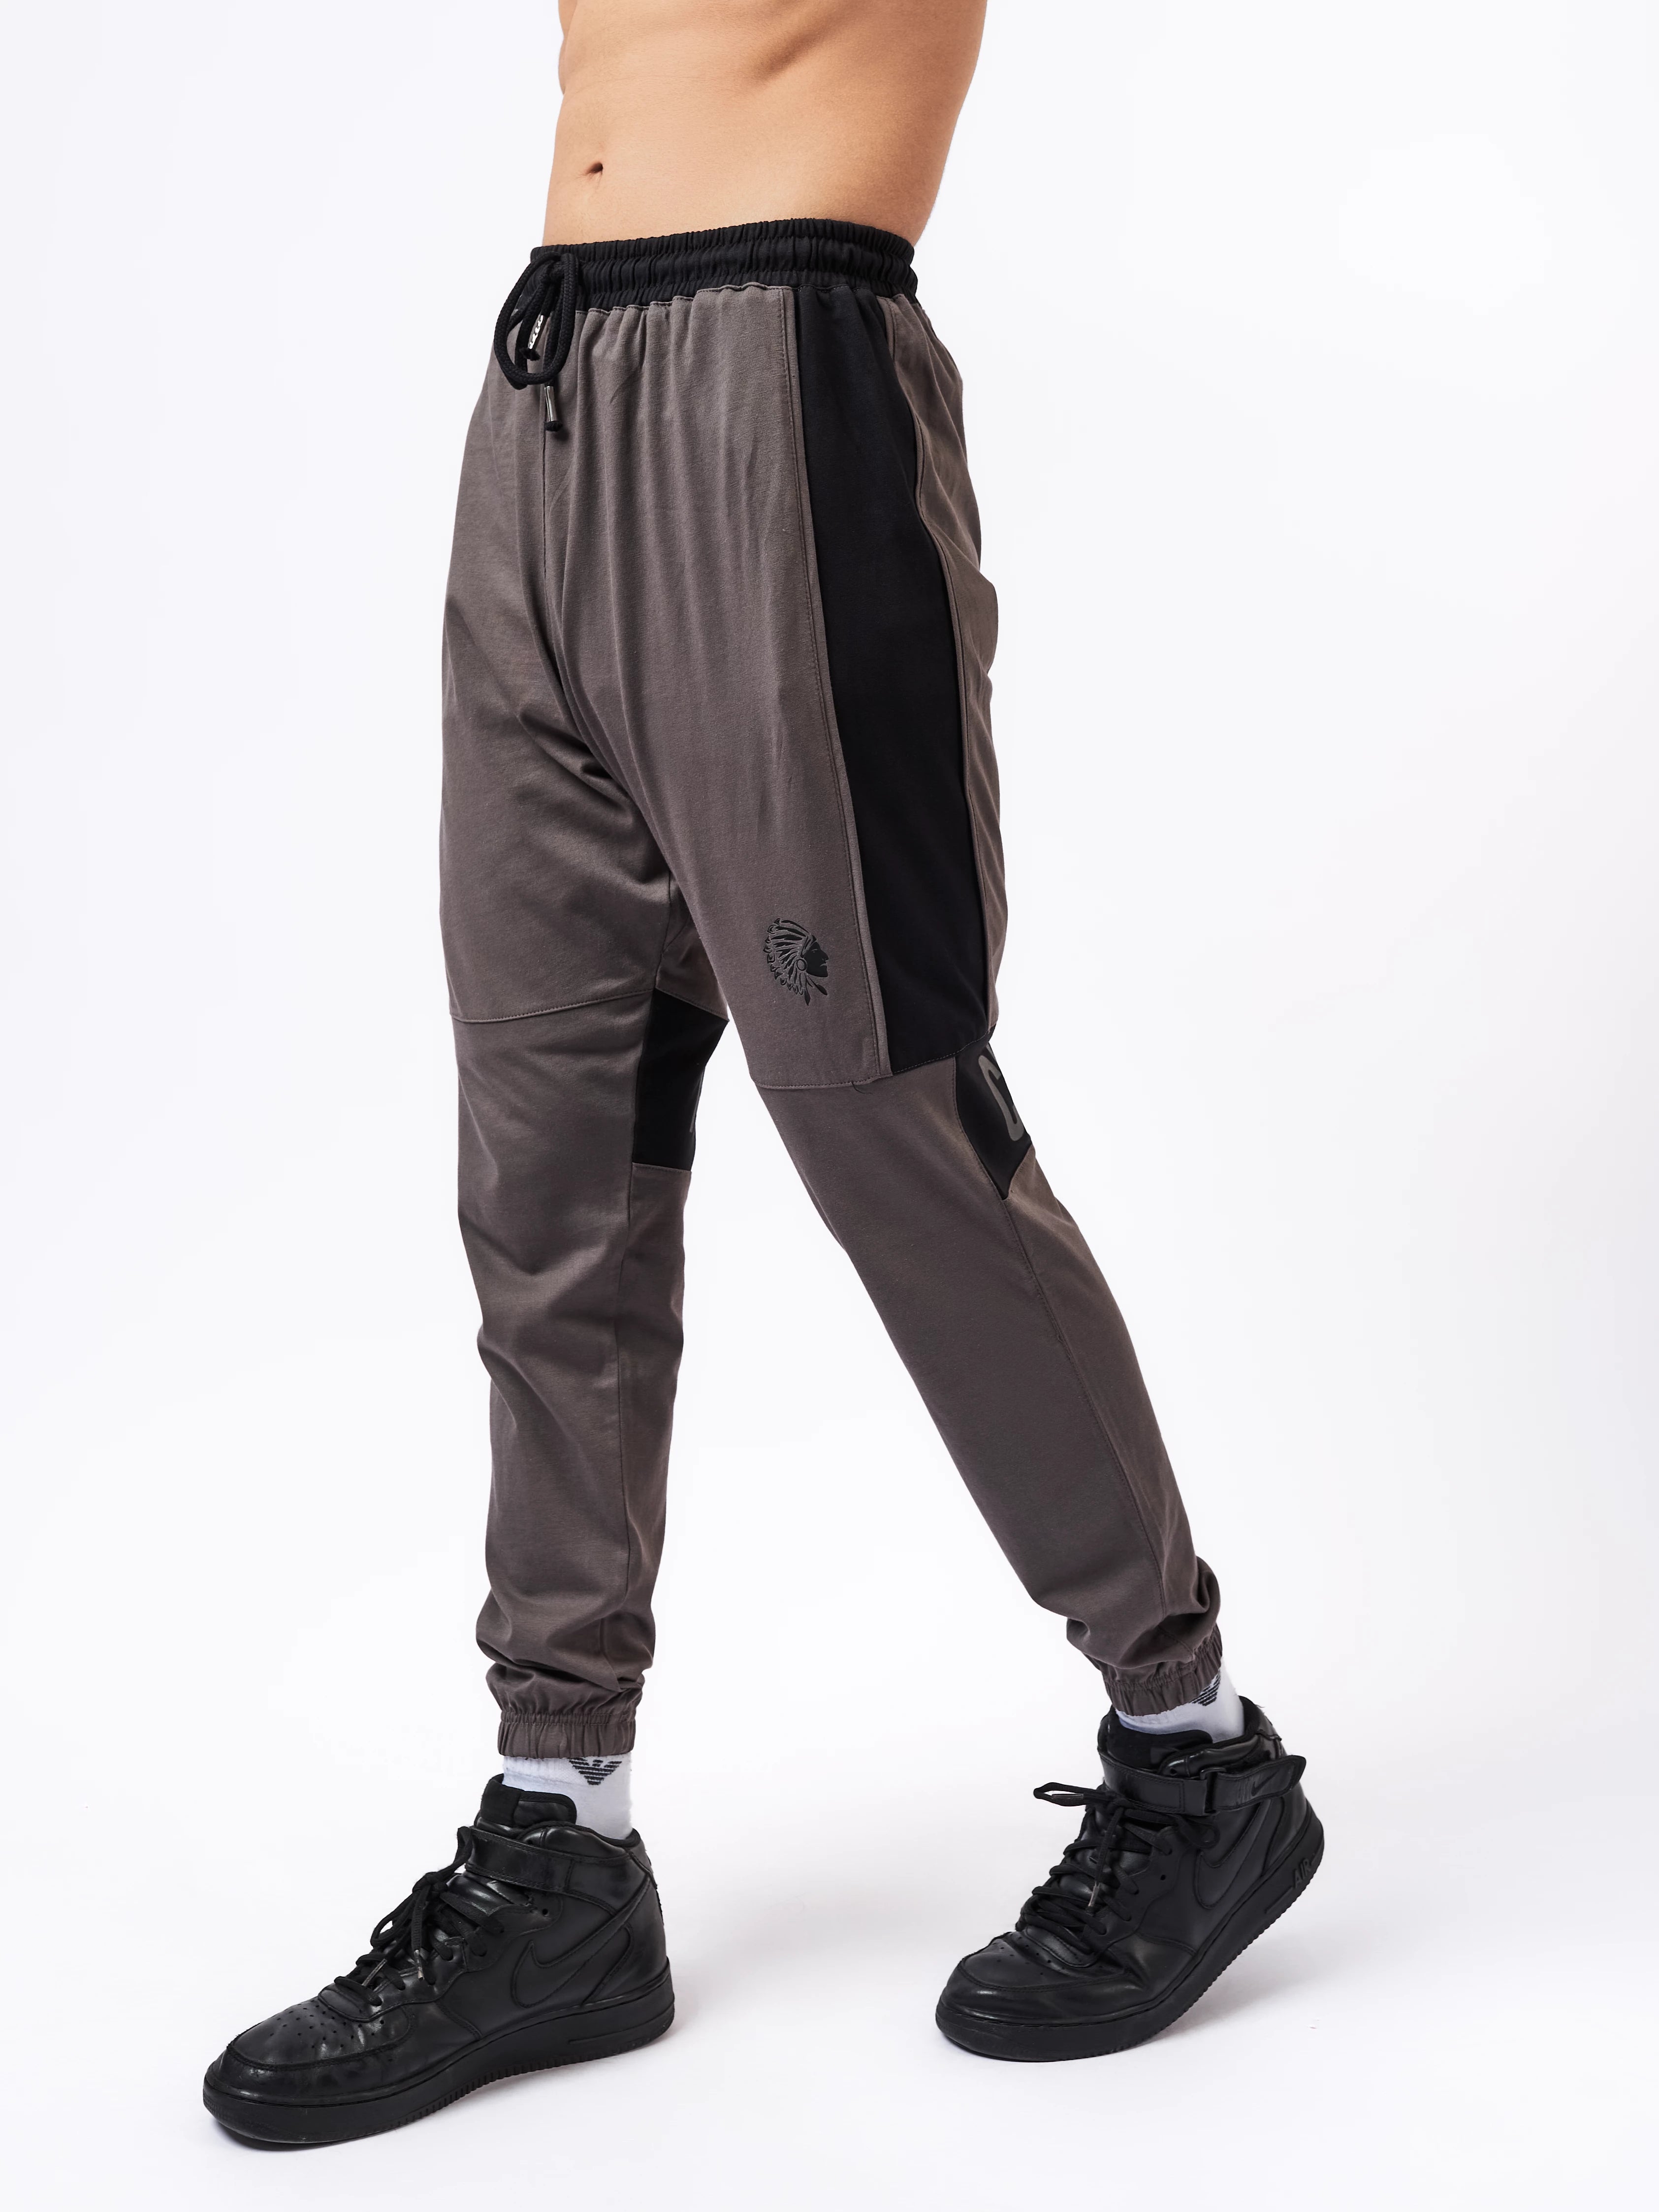 High Fashion Mens Drawstring Jogger Pants In Cotton Sports Sports Trousers  For Men For Gym And Jogging From Conniejersey, $23.86 | DHgate.Com